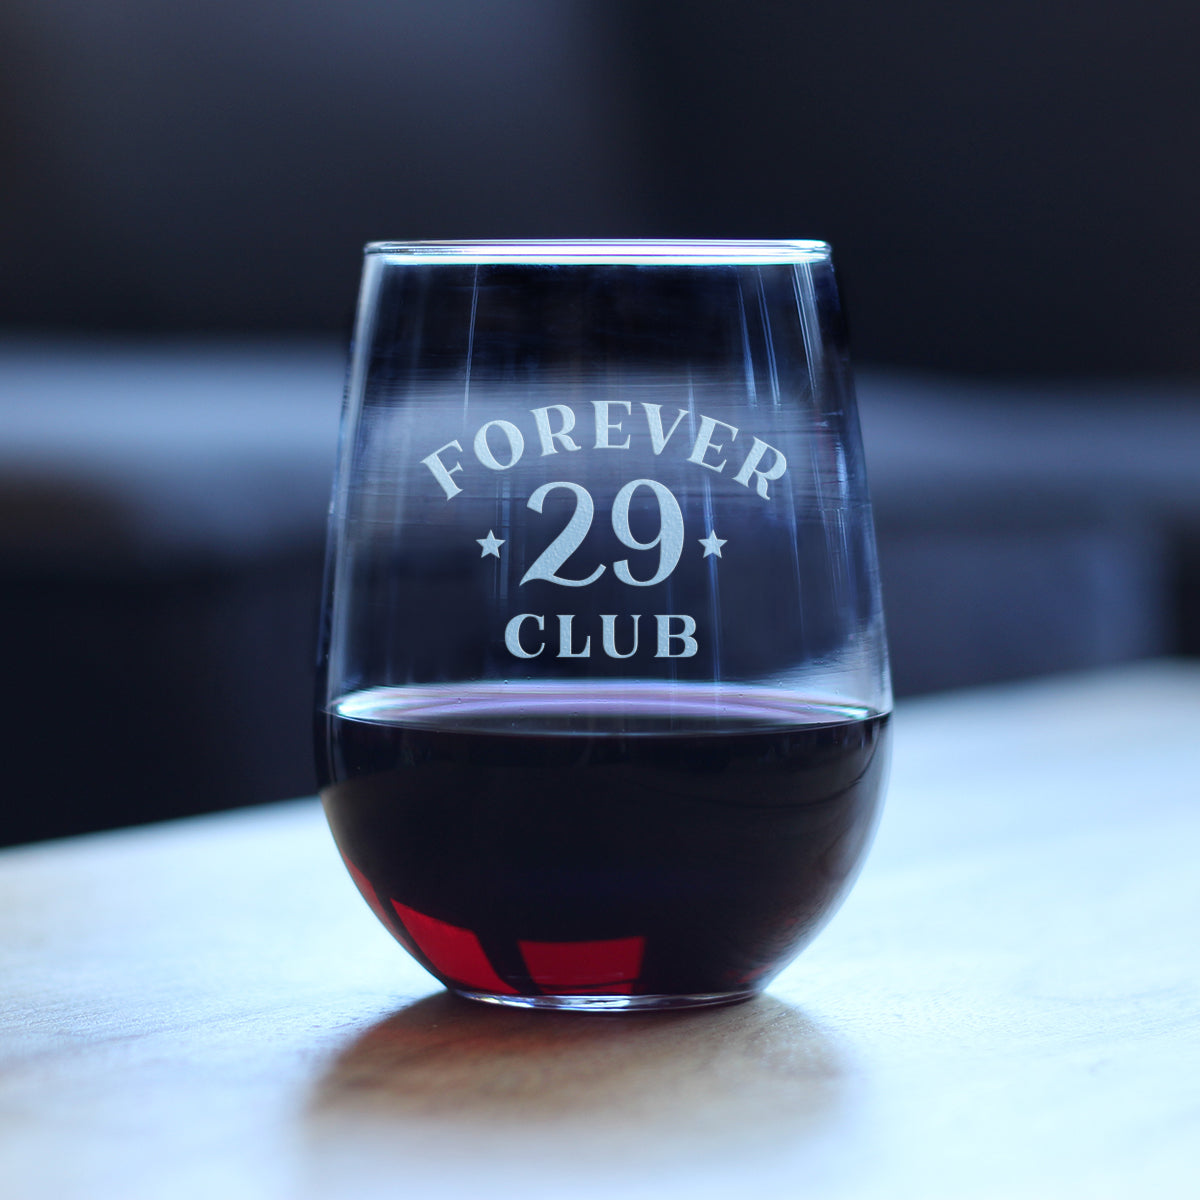 Forever 29 Club - Stemless Wine Glass Birthday Gifts for Women &amp; Men Turning 30-30th Bday Party Decor - Large 17 Oz Glasses